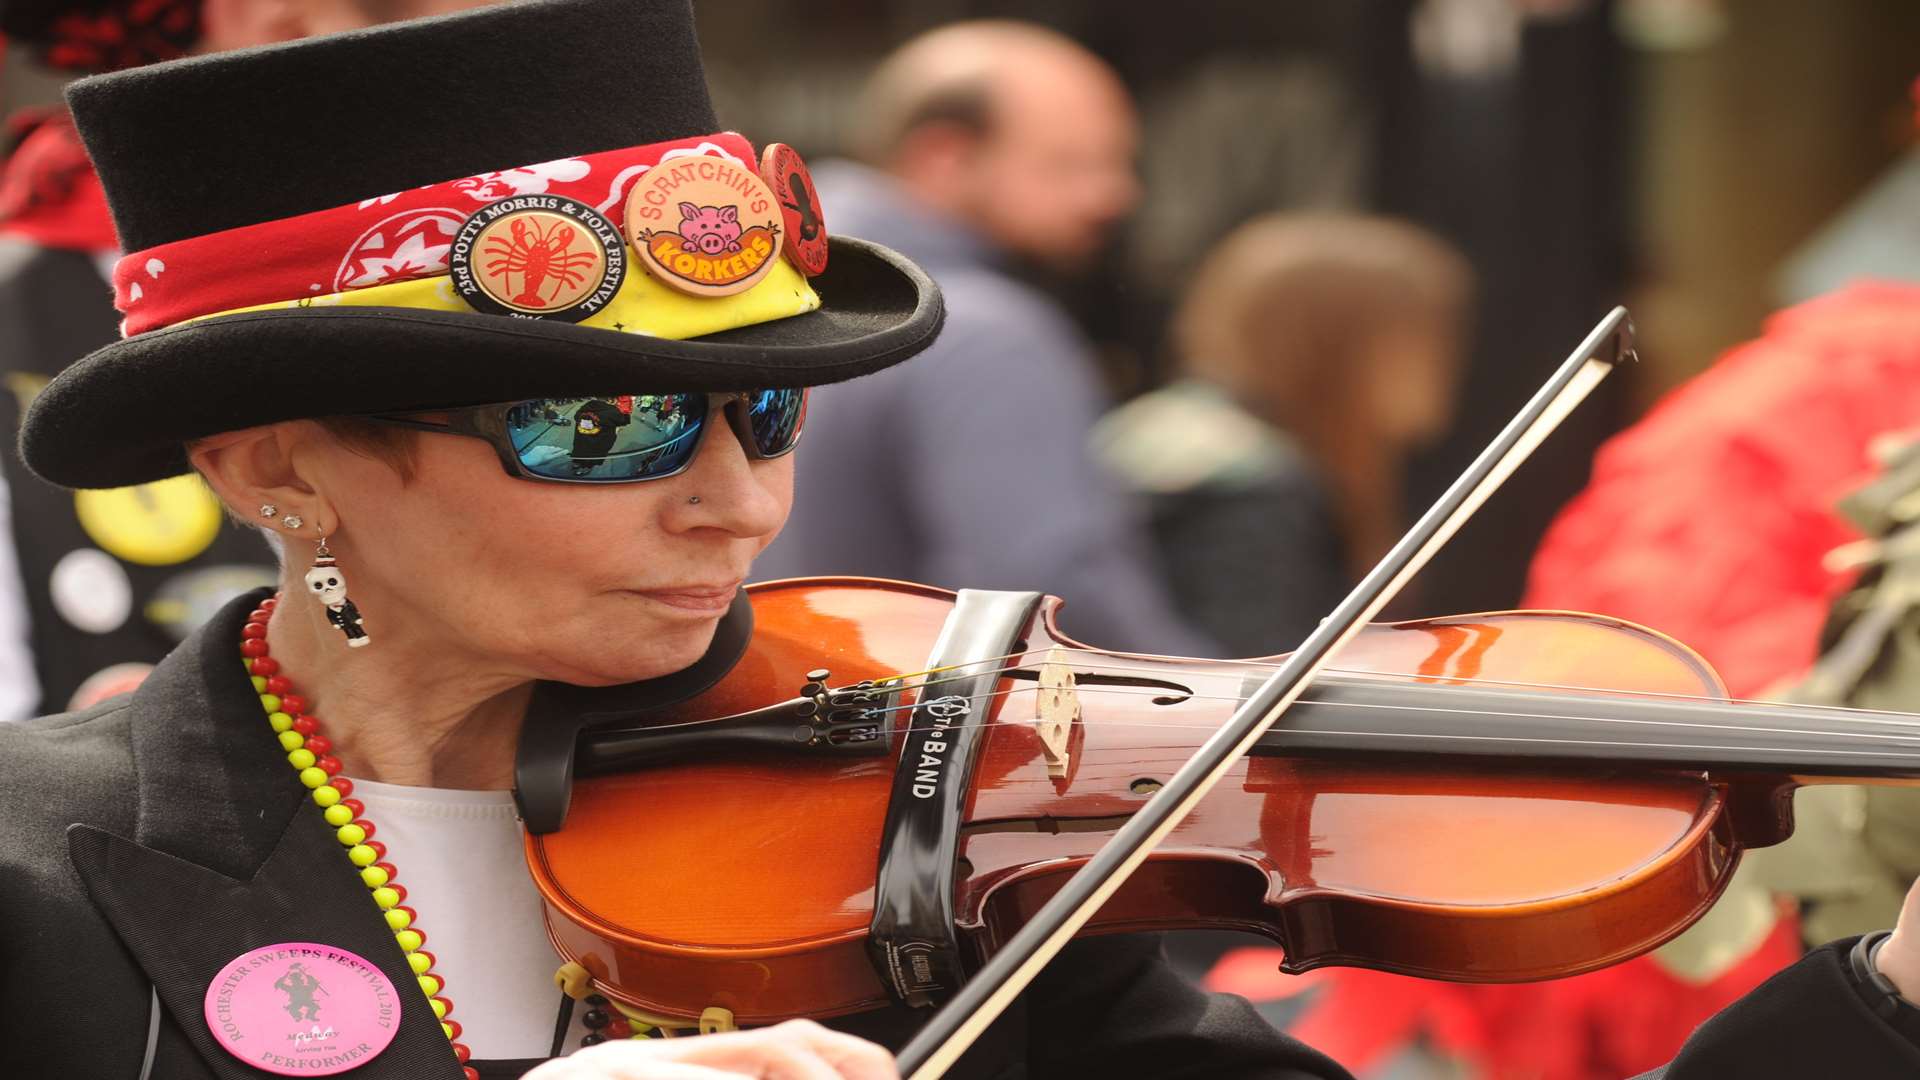 The Sweeps Festival will be returning to the streets of Rochester